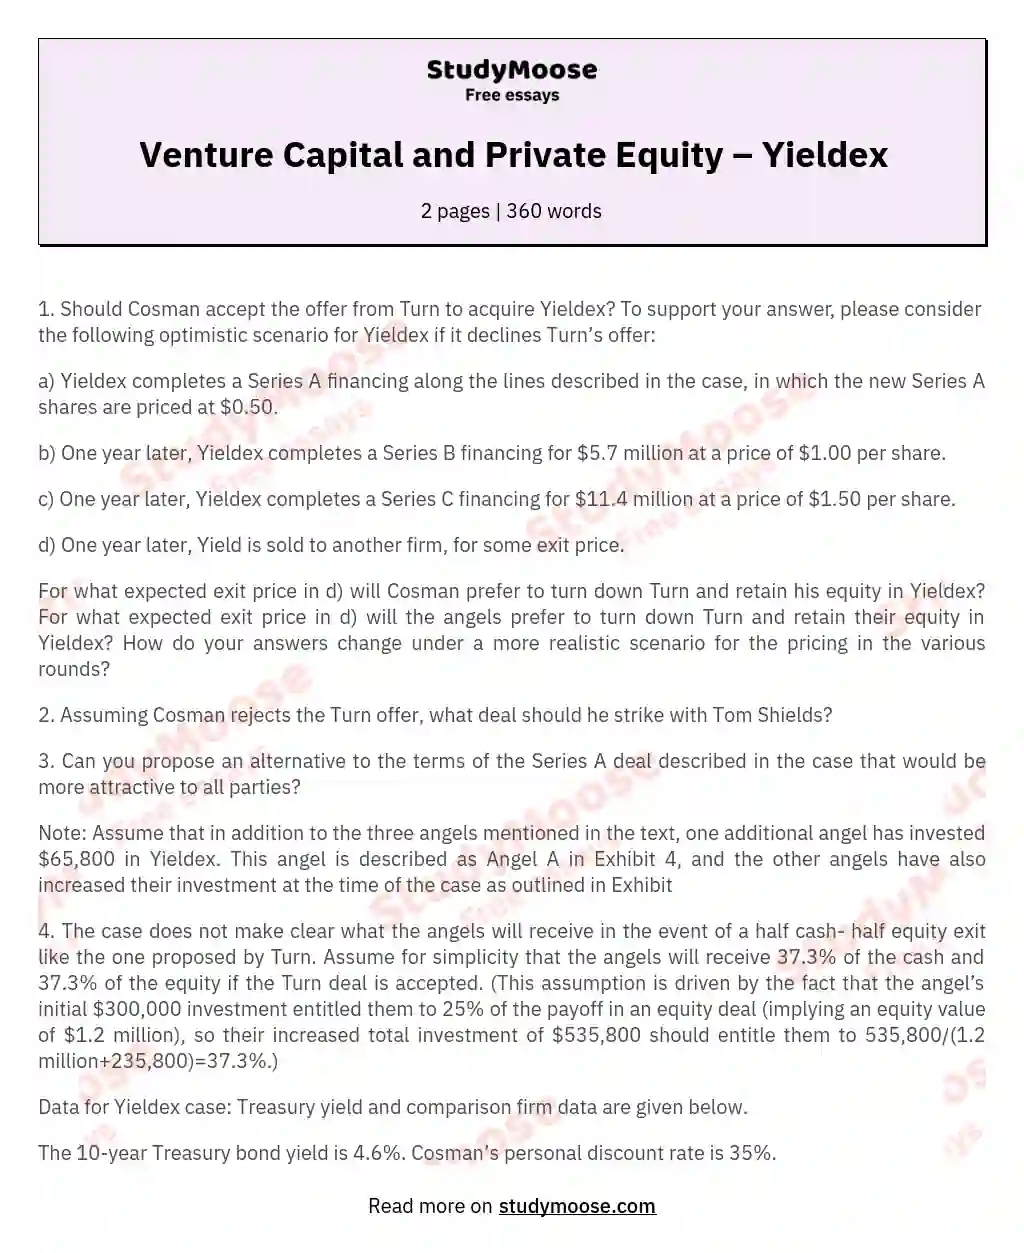 Venture Capital and Private Equity – Yieldex